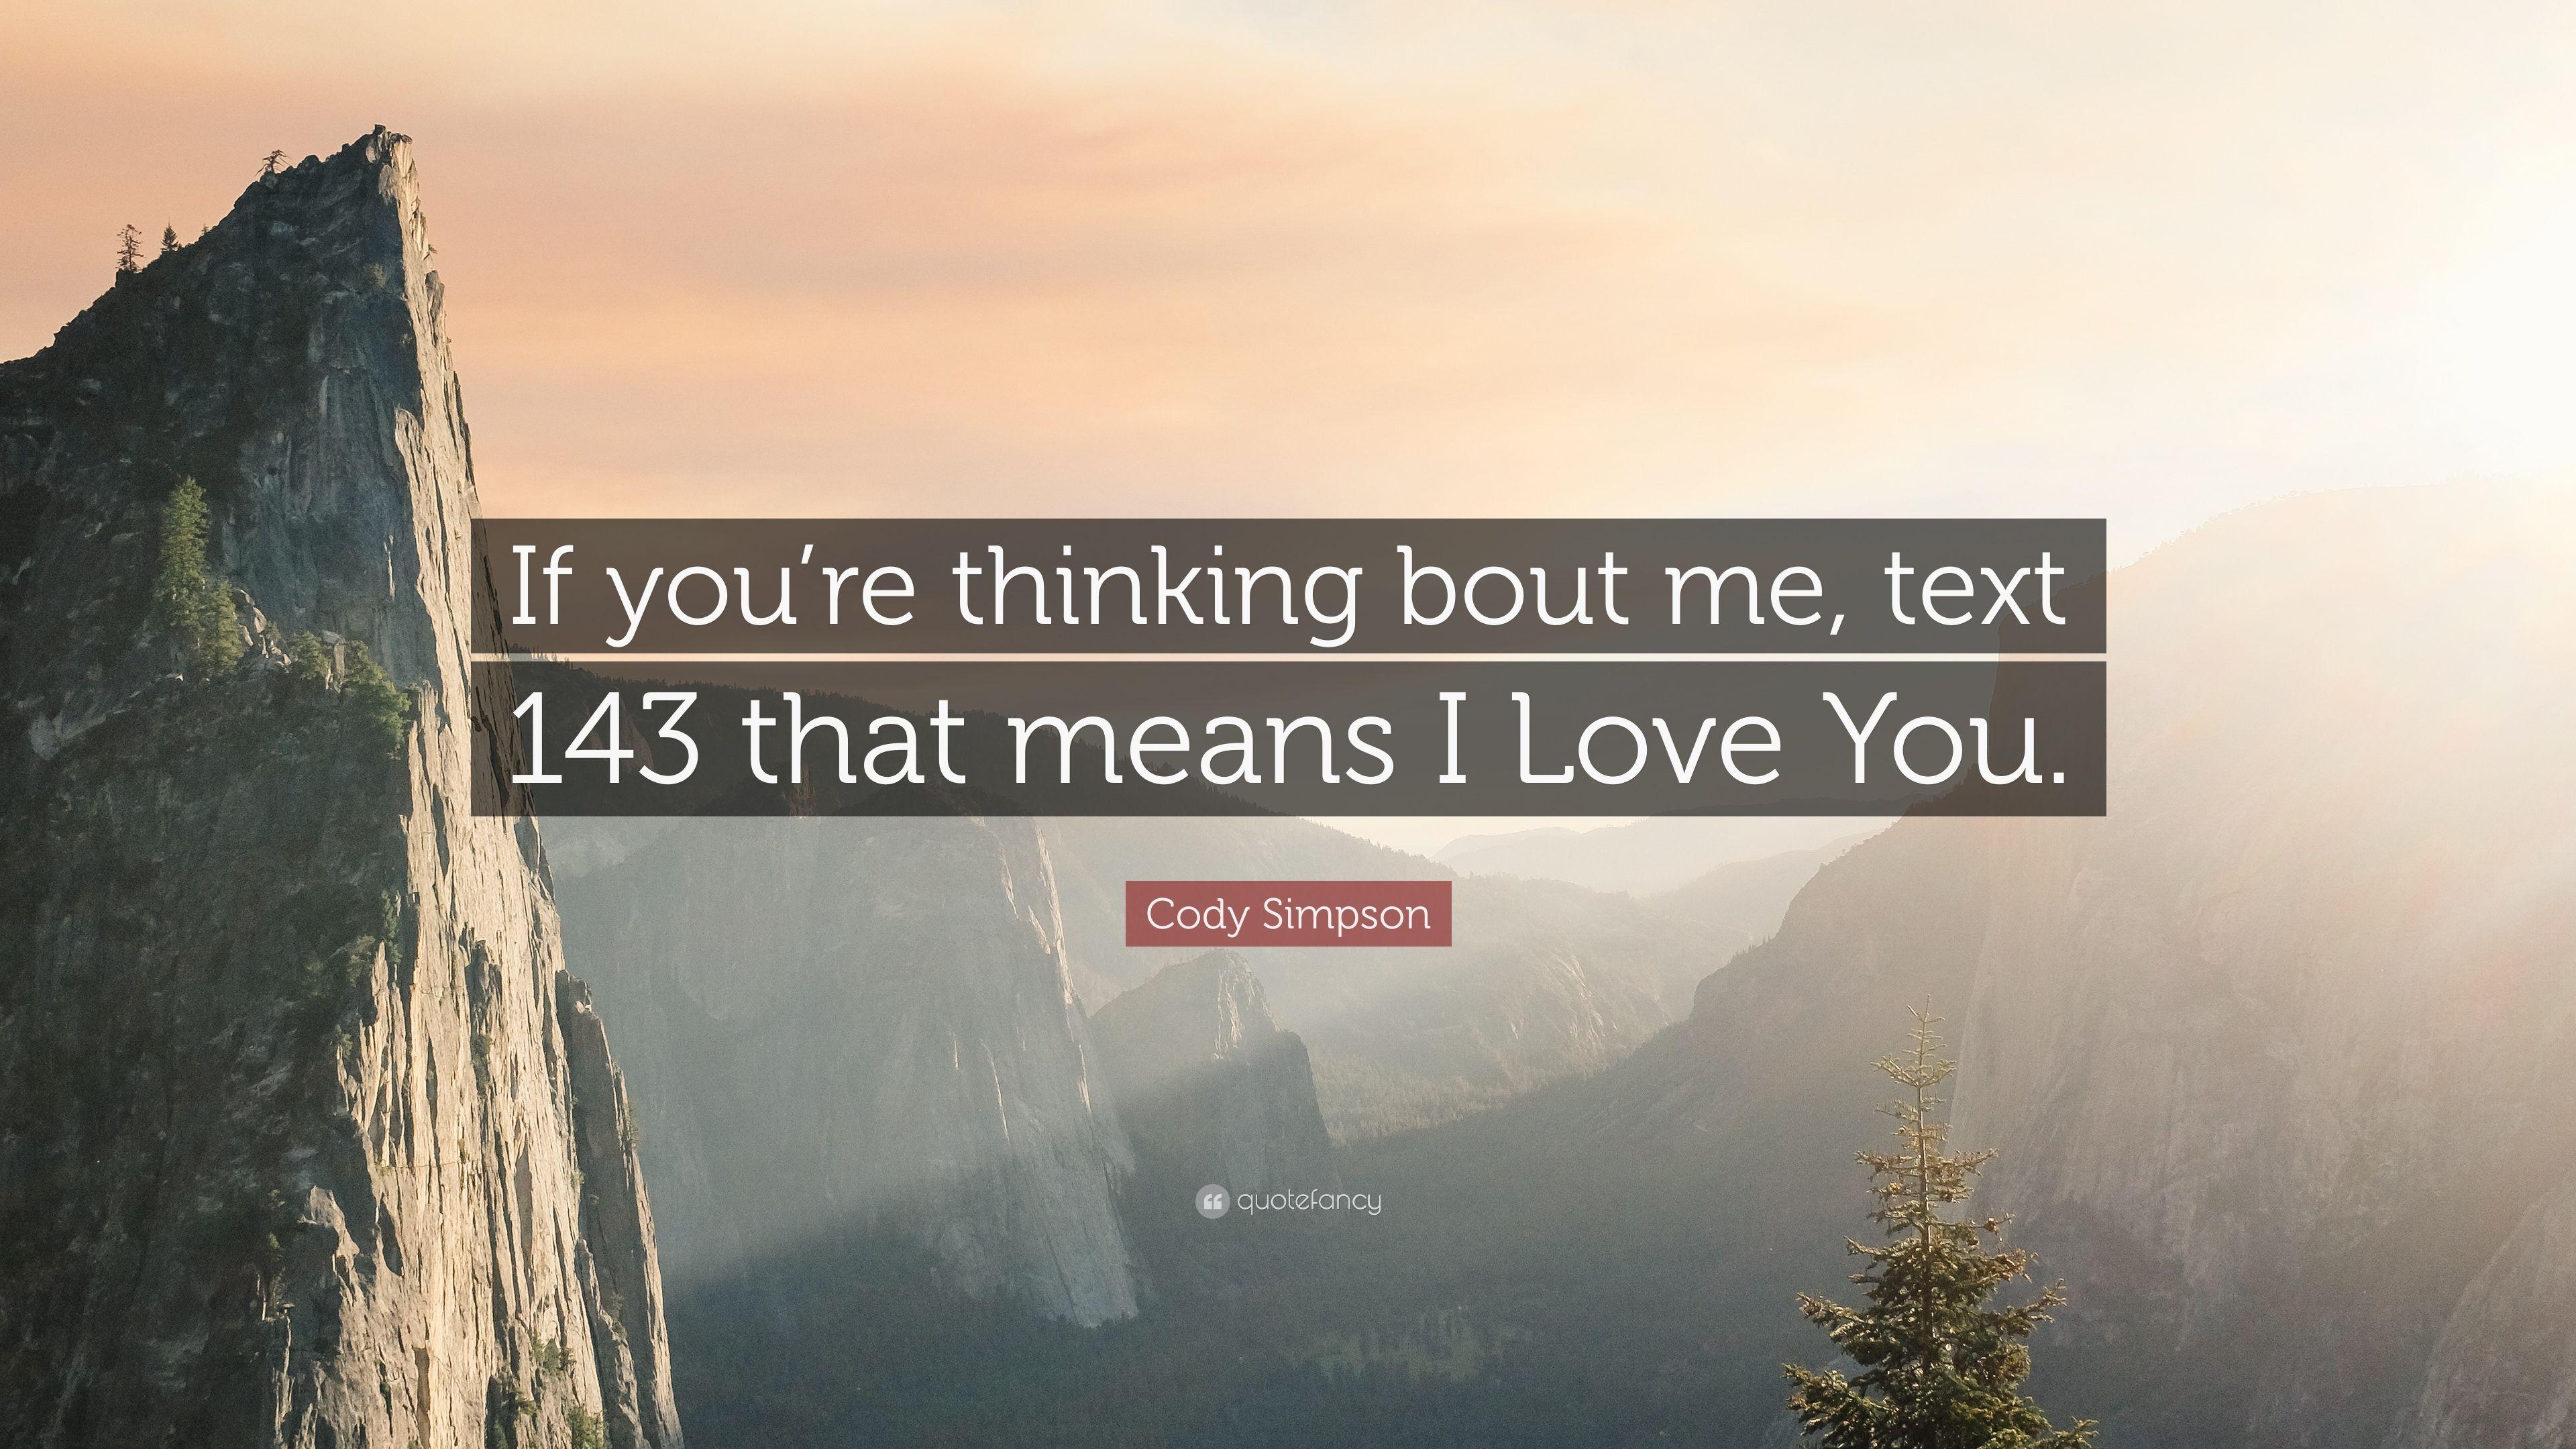 Cody Simpson Quote: “If you're thinking bout me, text 143 that